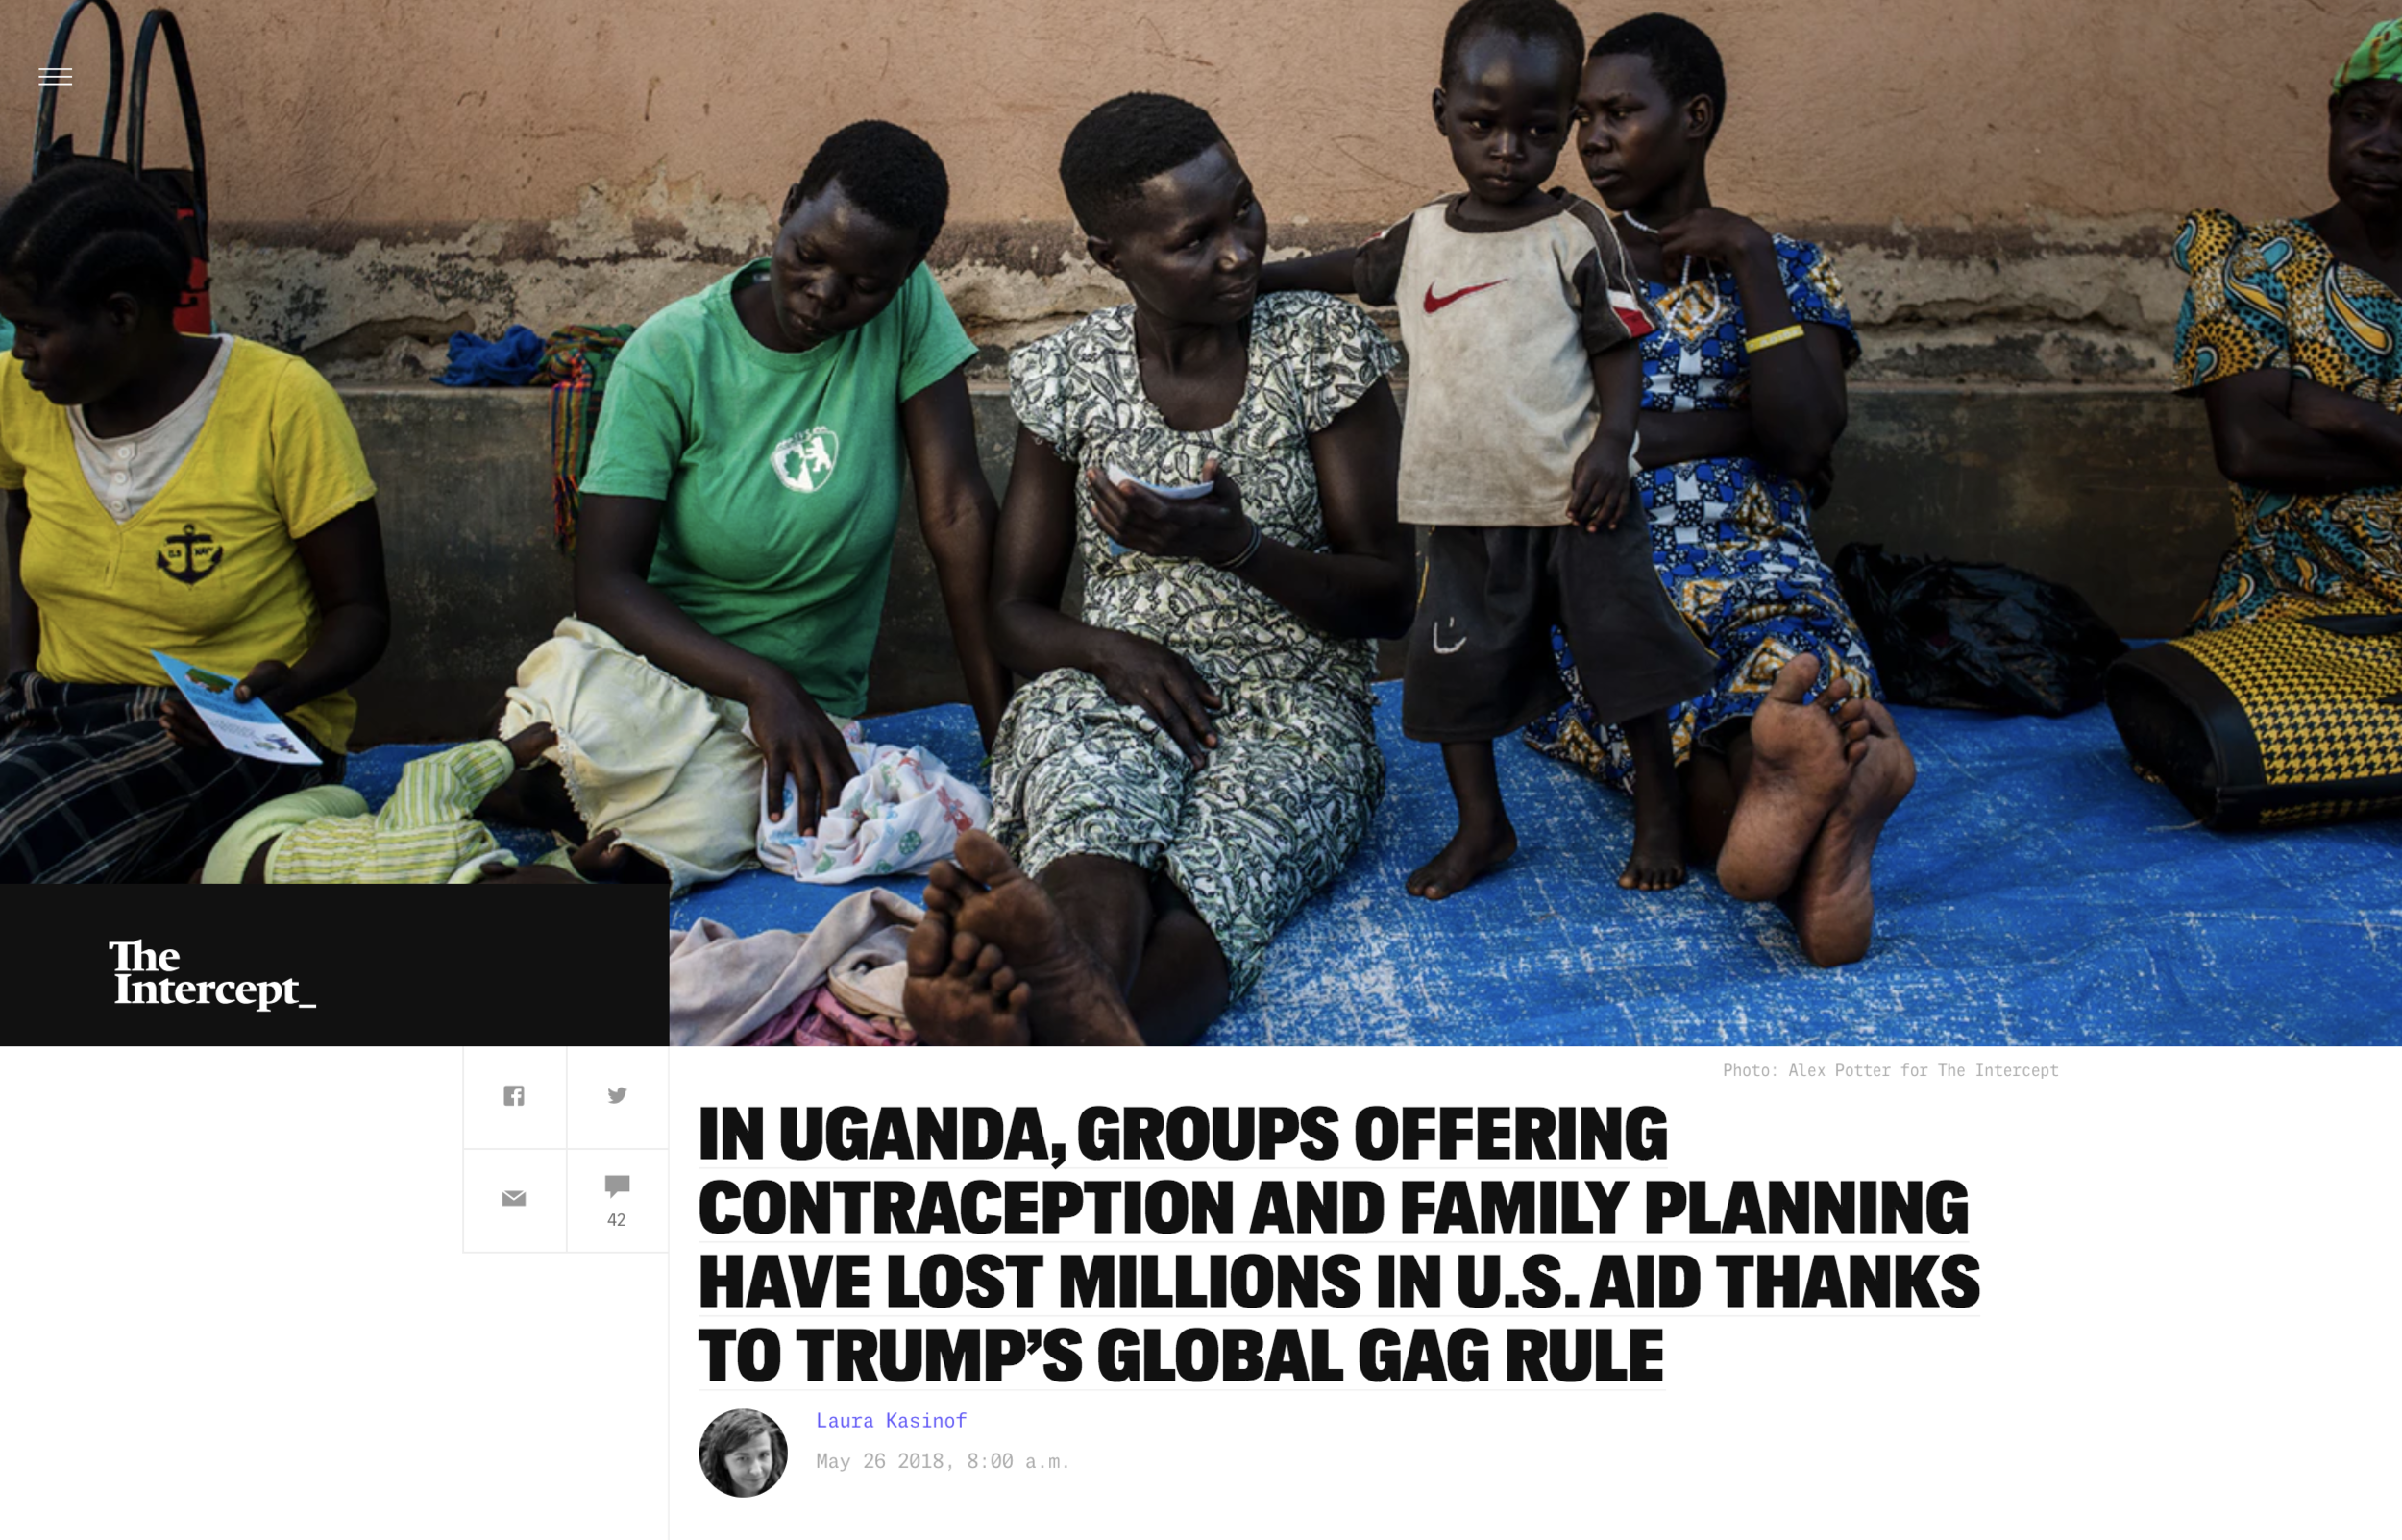  Photography: Alex Potter  Photo Editing: Ariel Zambelich  Story:  In Uganda, Groups Offering Contraception And Family Planning Have Lost Millions In U.S. Aid Thanks To Trump’s Global Gag Rule  